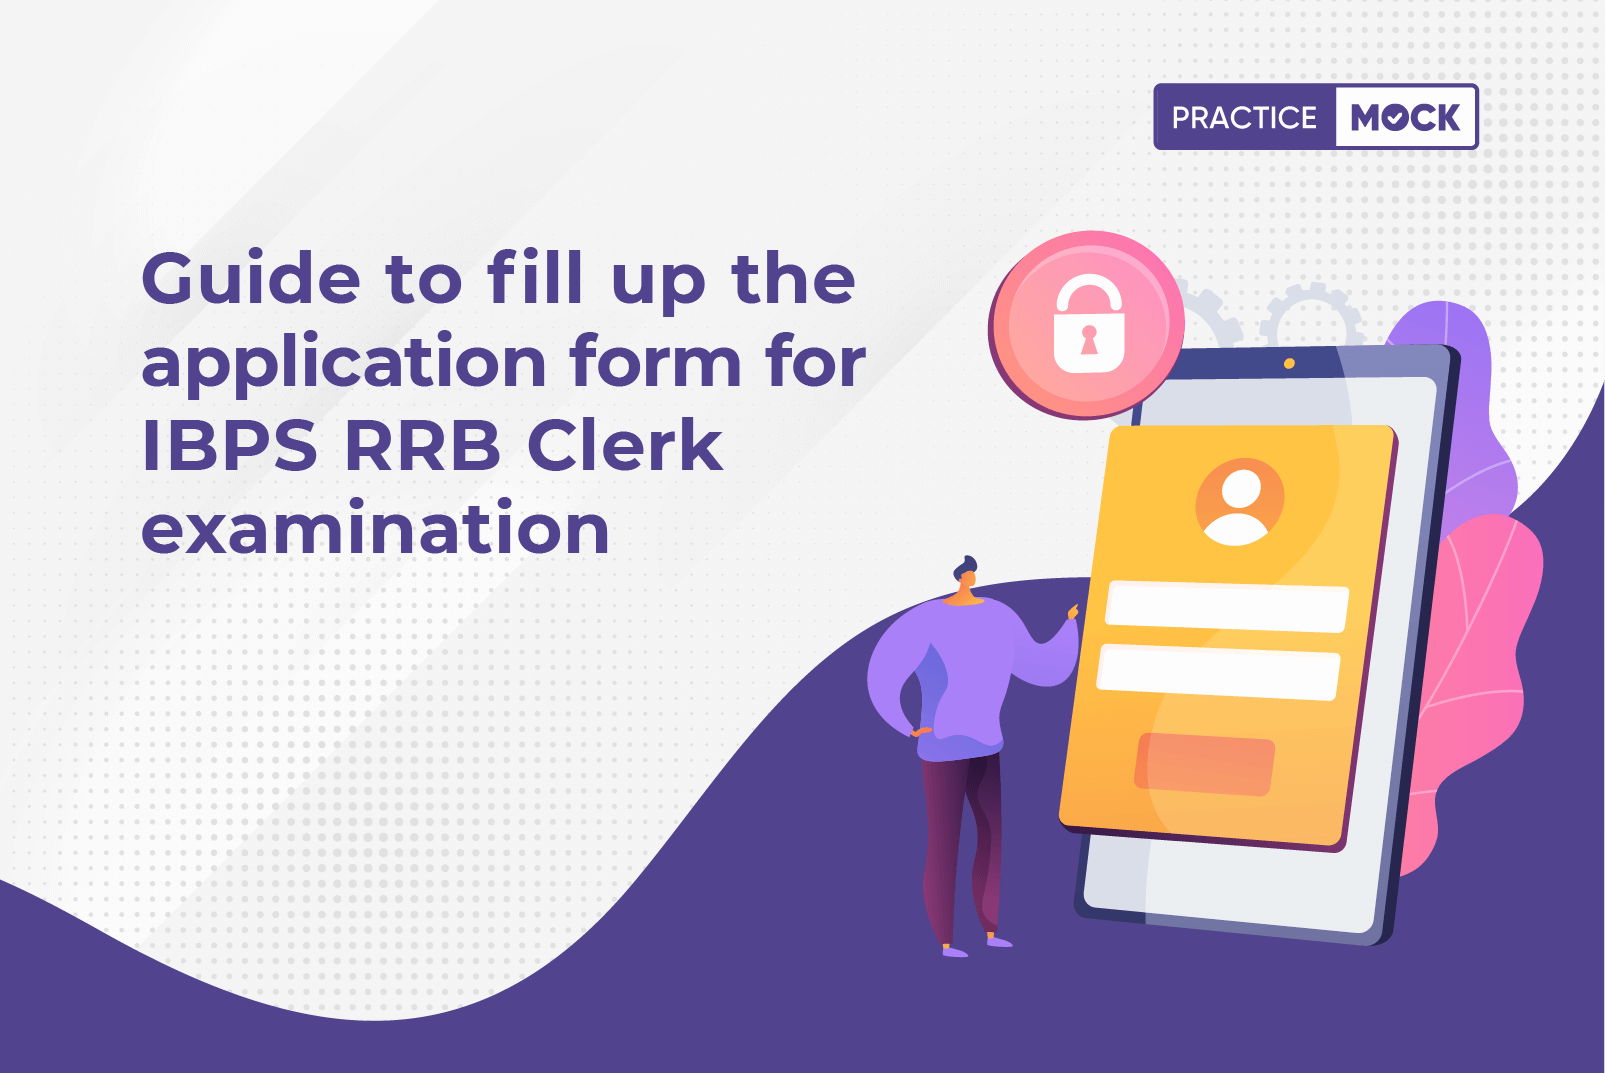 Guide To Fill Up The Application Form For IBPS RRB Clerk Examination